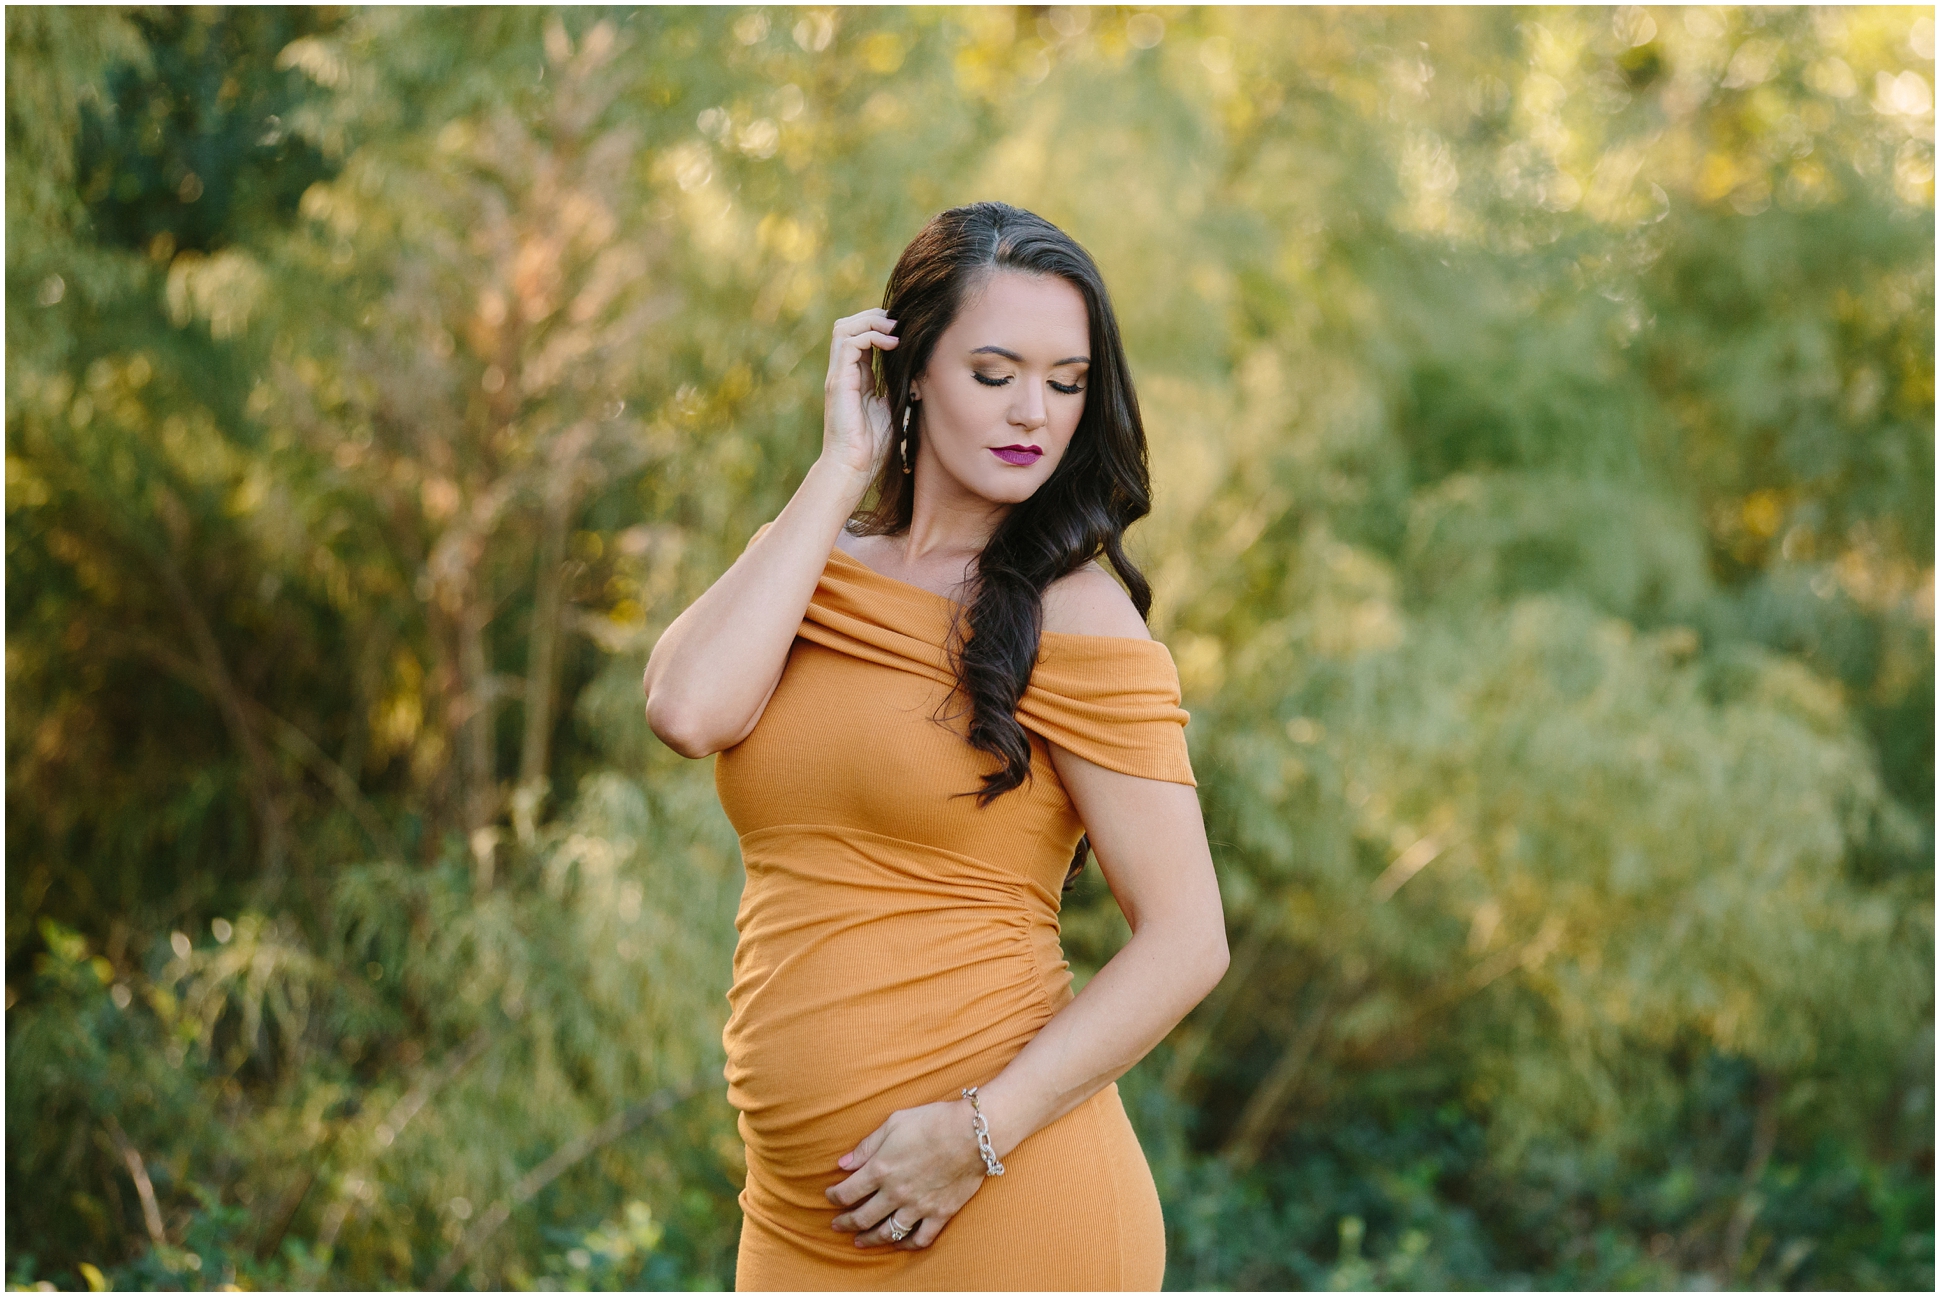 Natural Field Maternity Session | Two Chics Photography | www.twochicsphotography.com